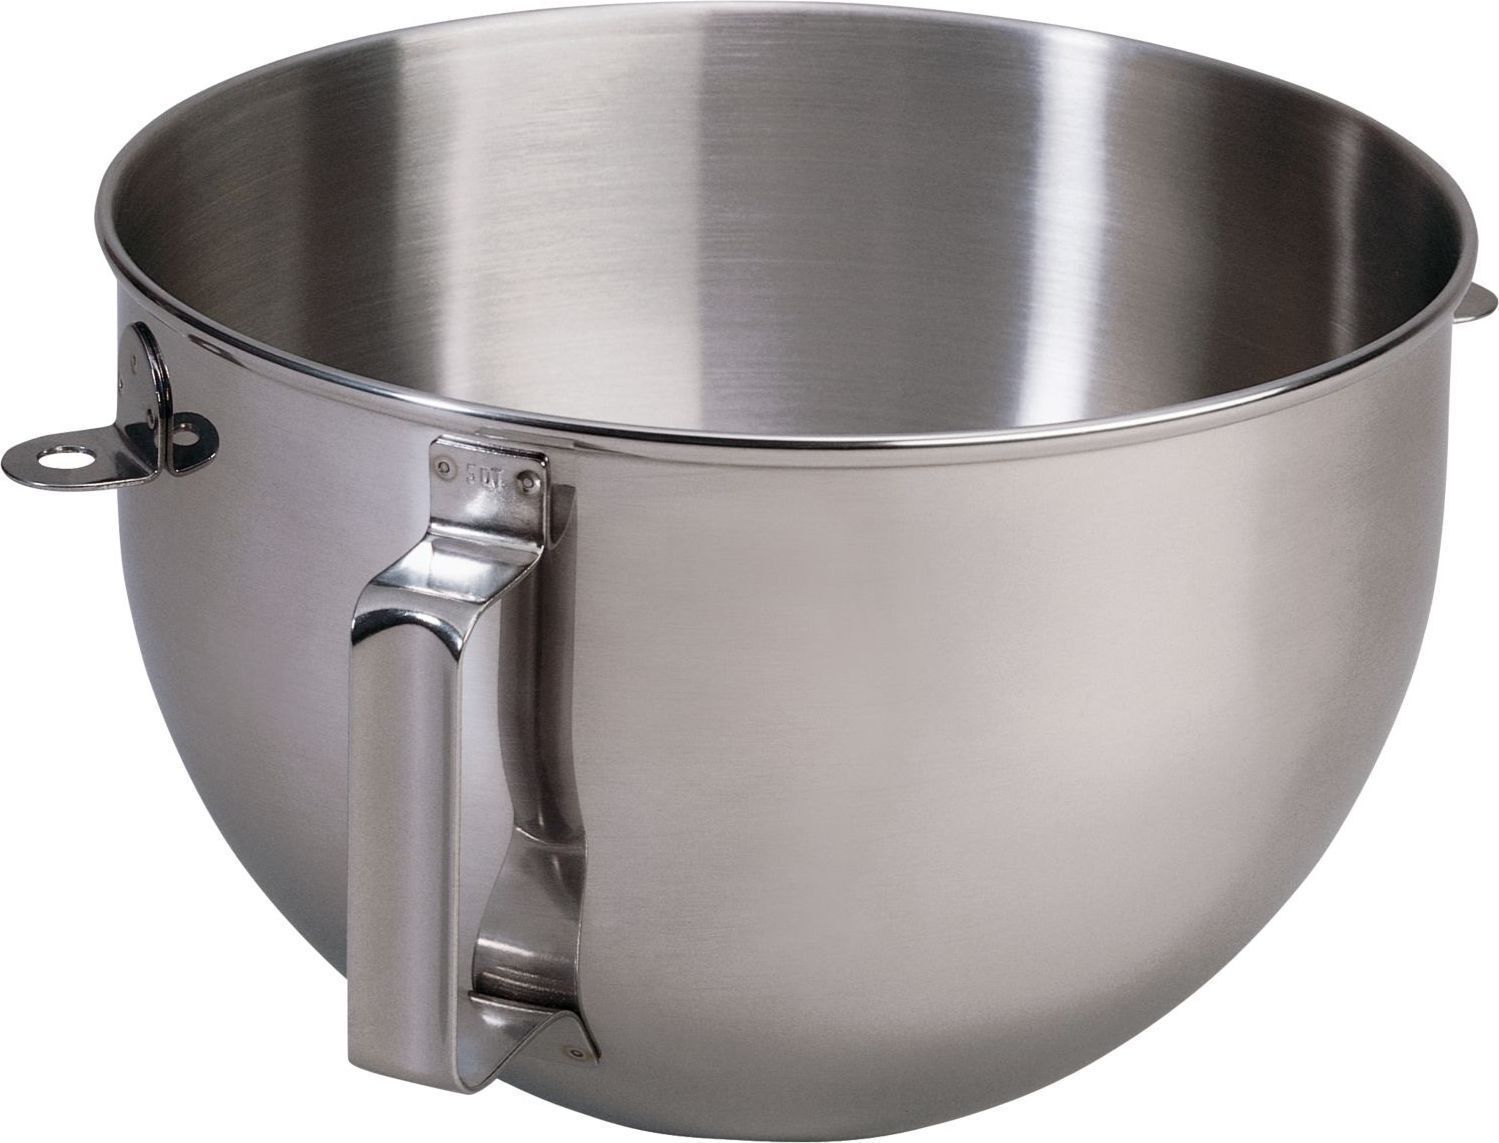 KitchenAid - 5 QT Bowl-Lift Polished Stainless Steel Bowl with Flat Handle - KN25WPBH